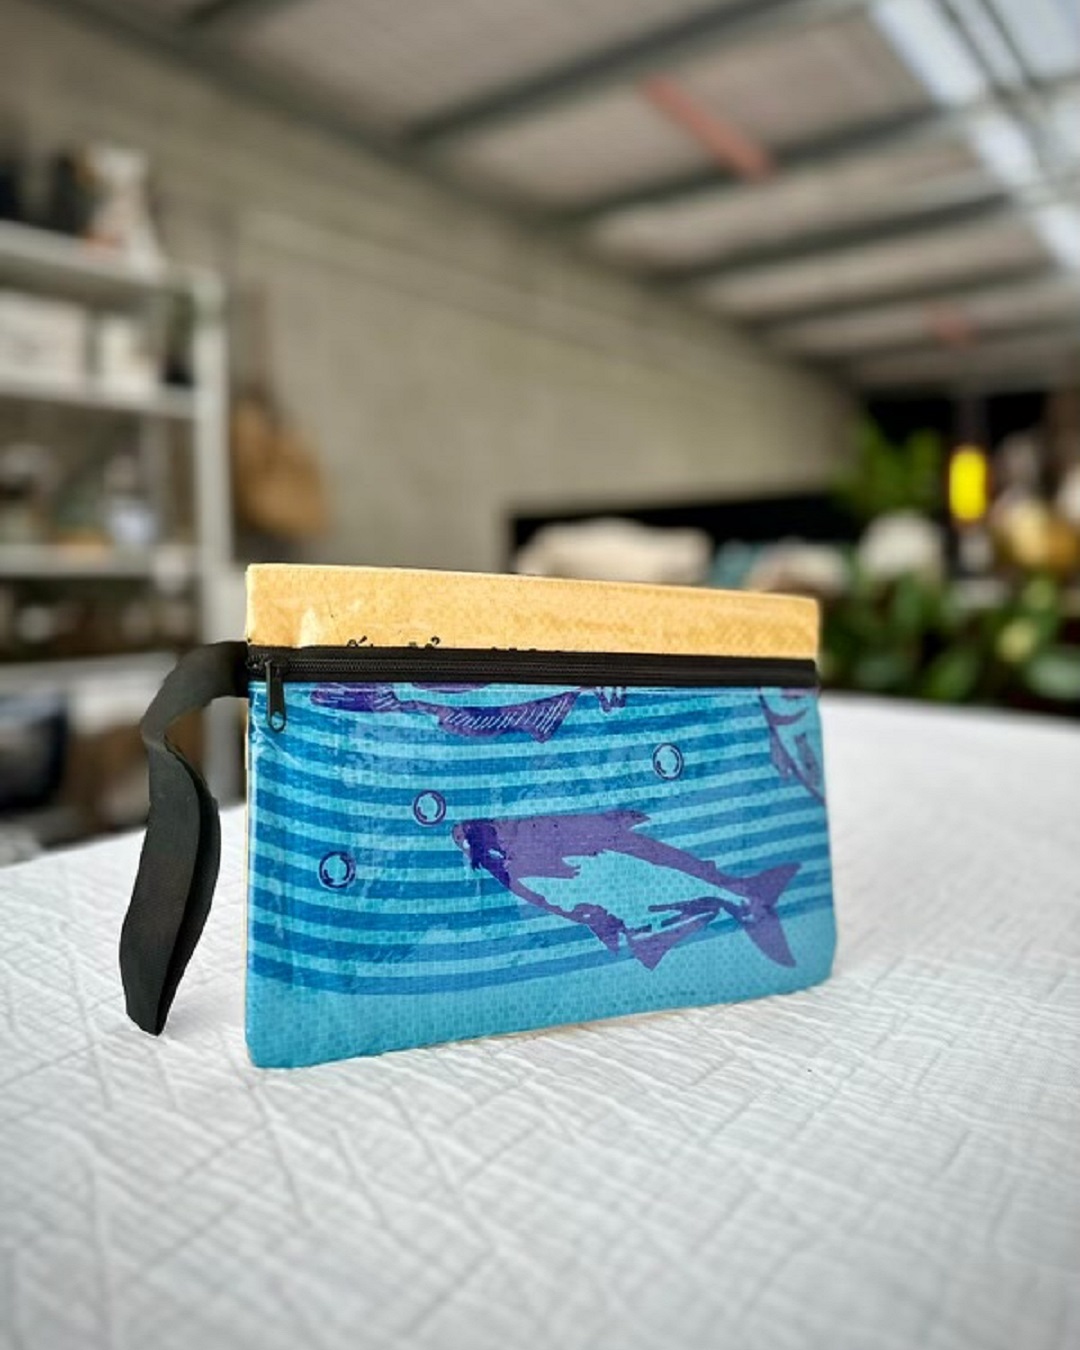 Blue fish purse on bed